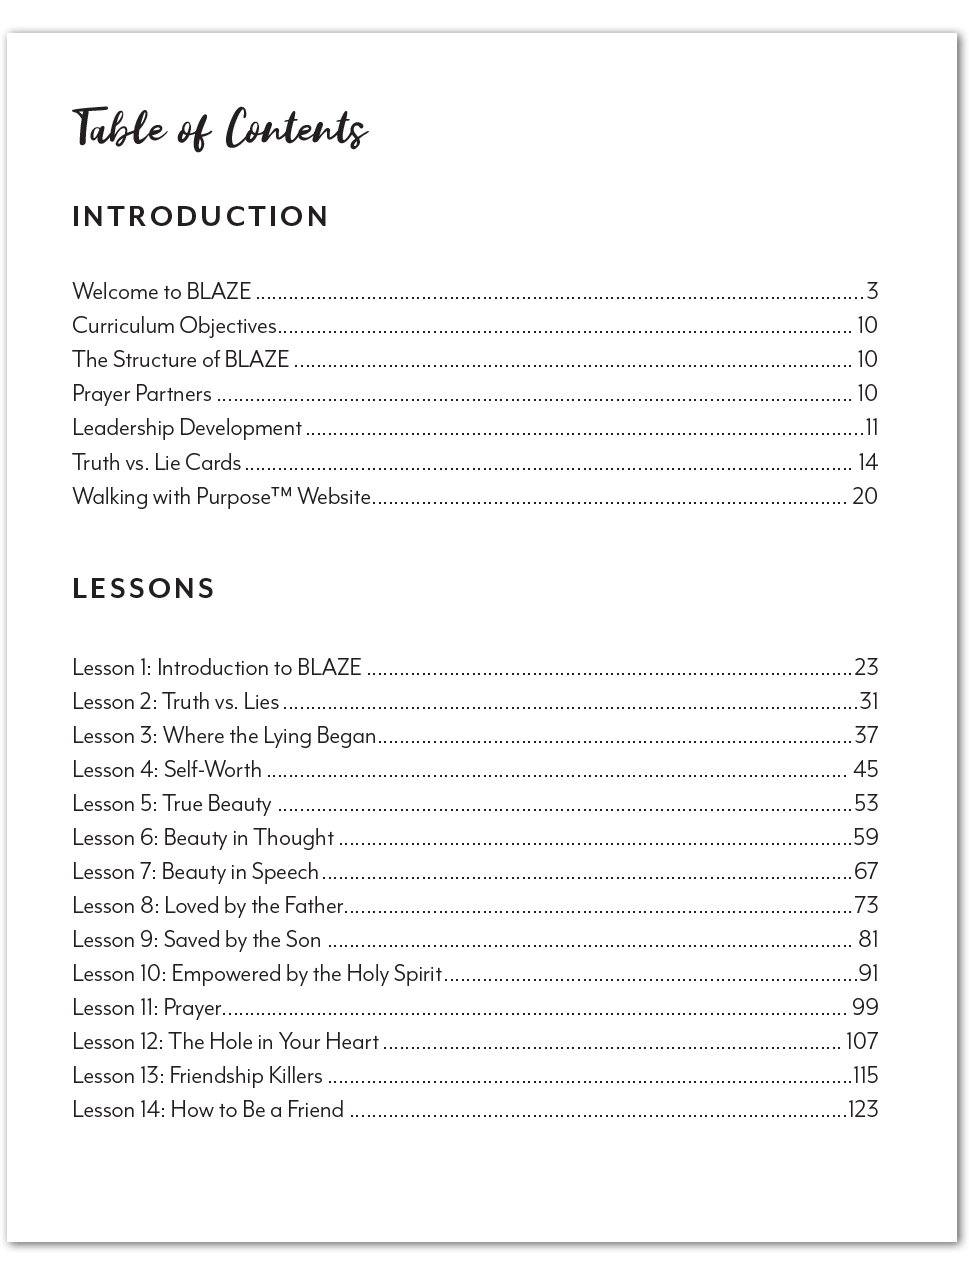 BLAZE Masterpiece leaders guide table of contents page 1